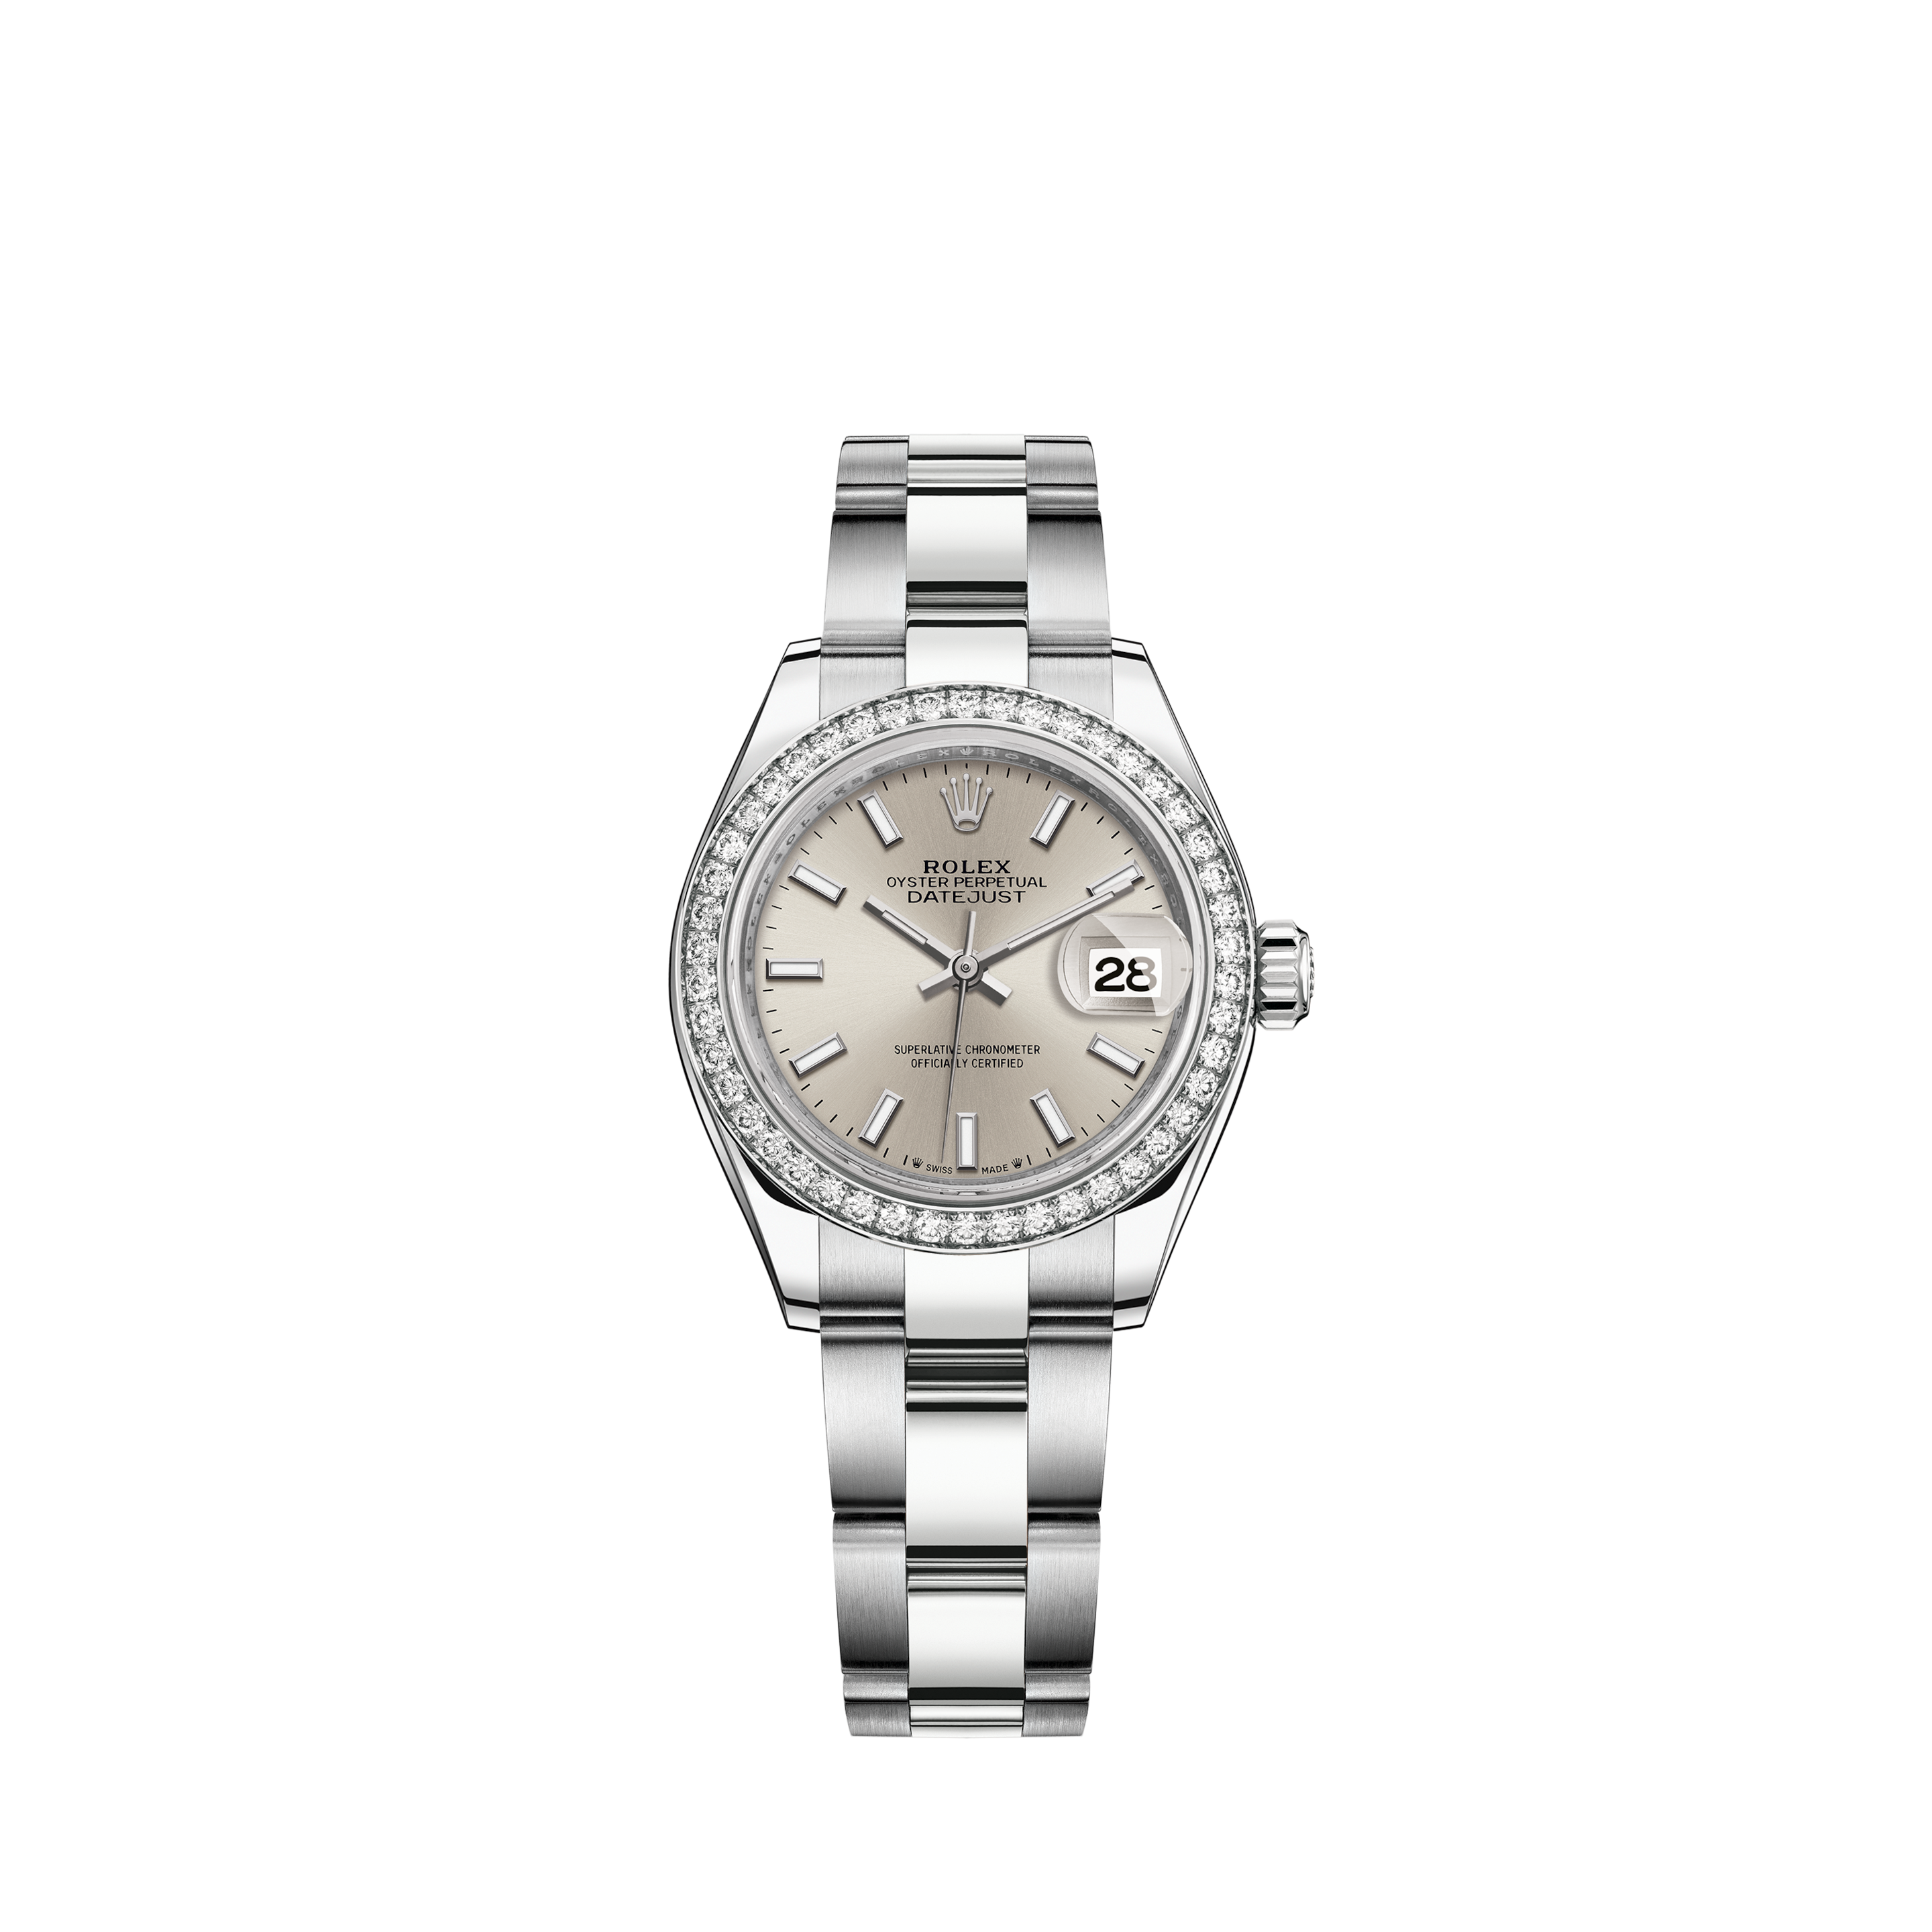 Rolex Lady-Datejust 26mm in Steel & White Gold with PINK Diamond Dial - Box and Papers